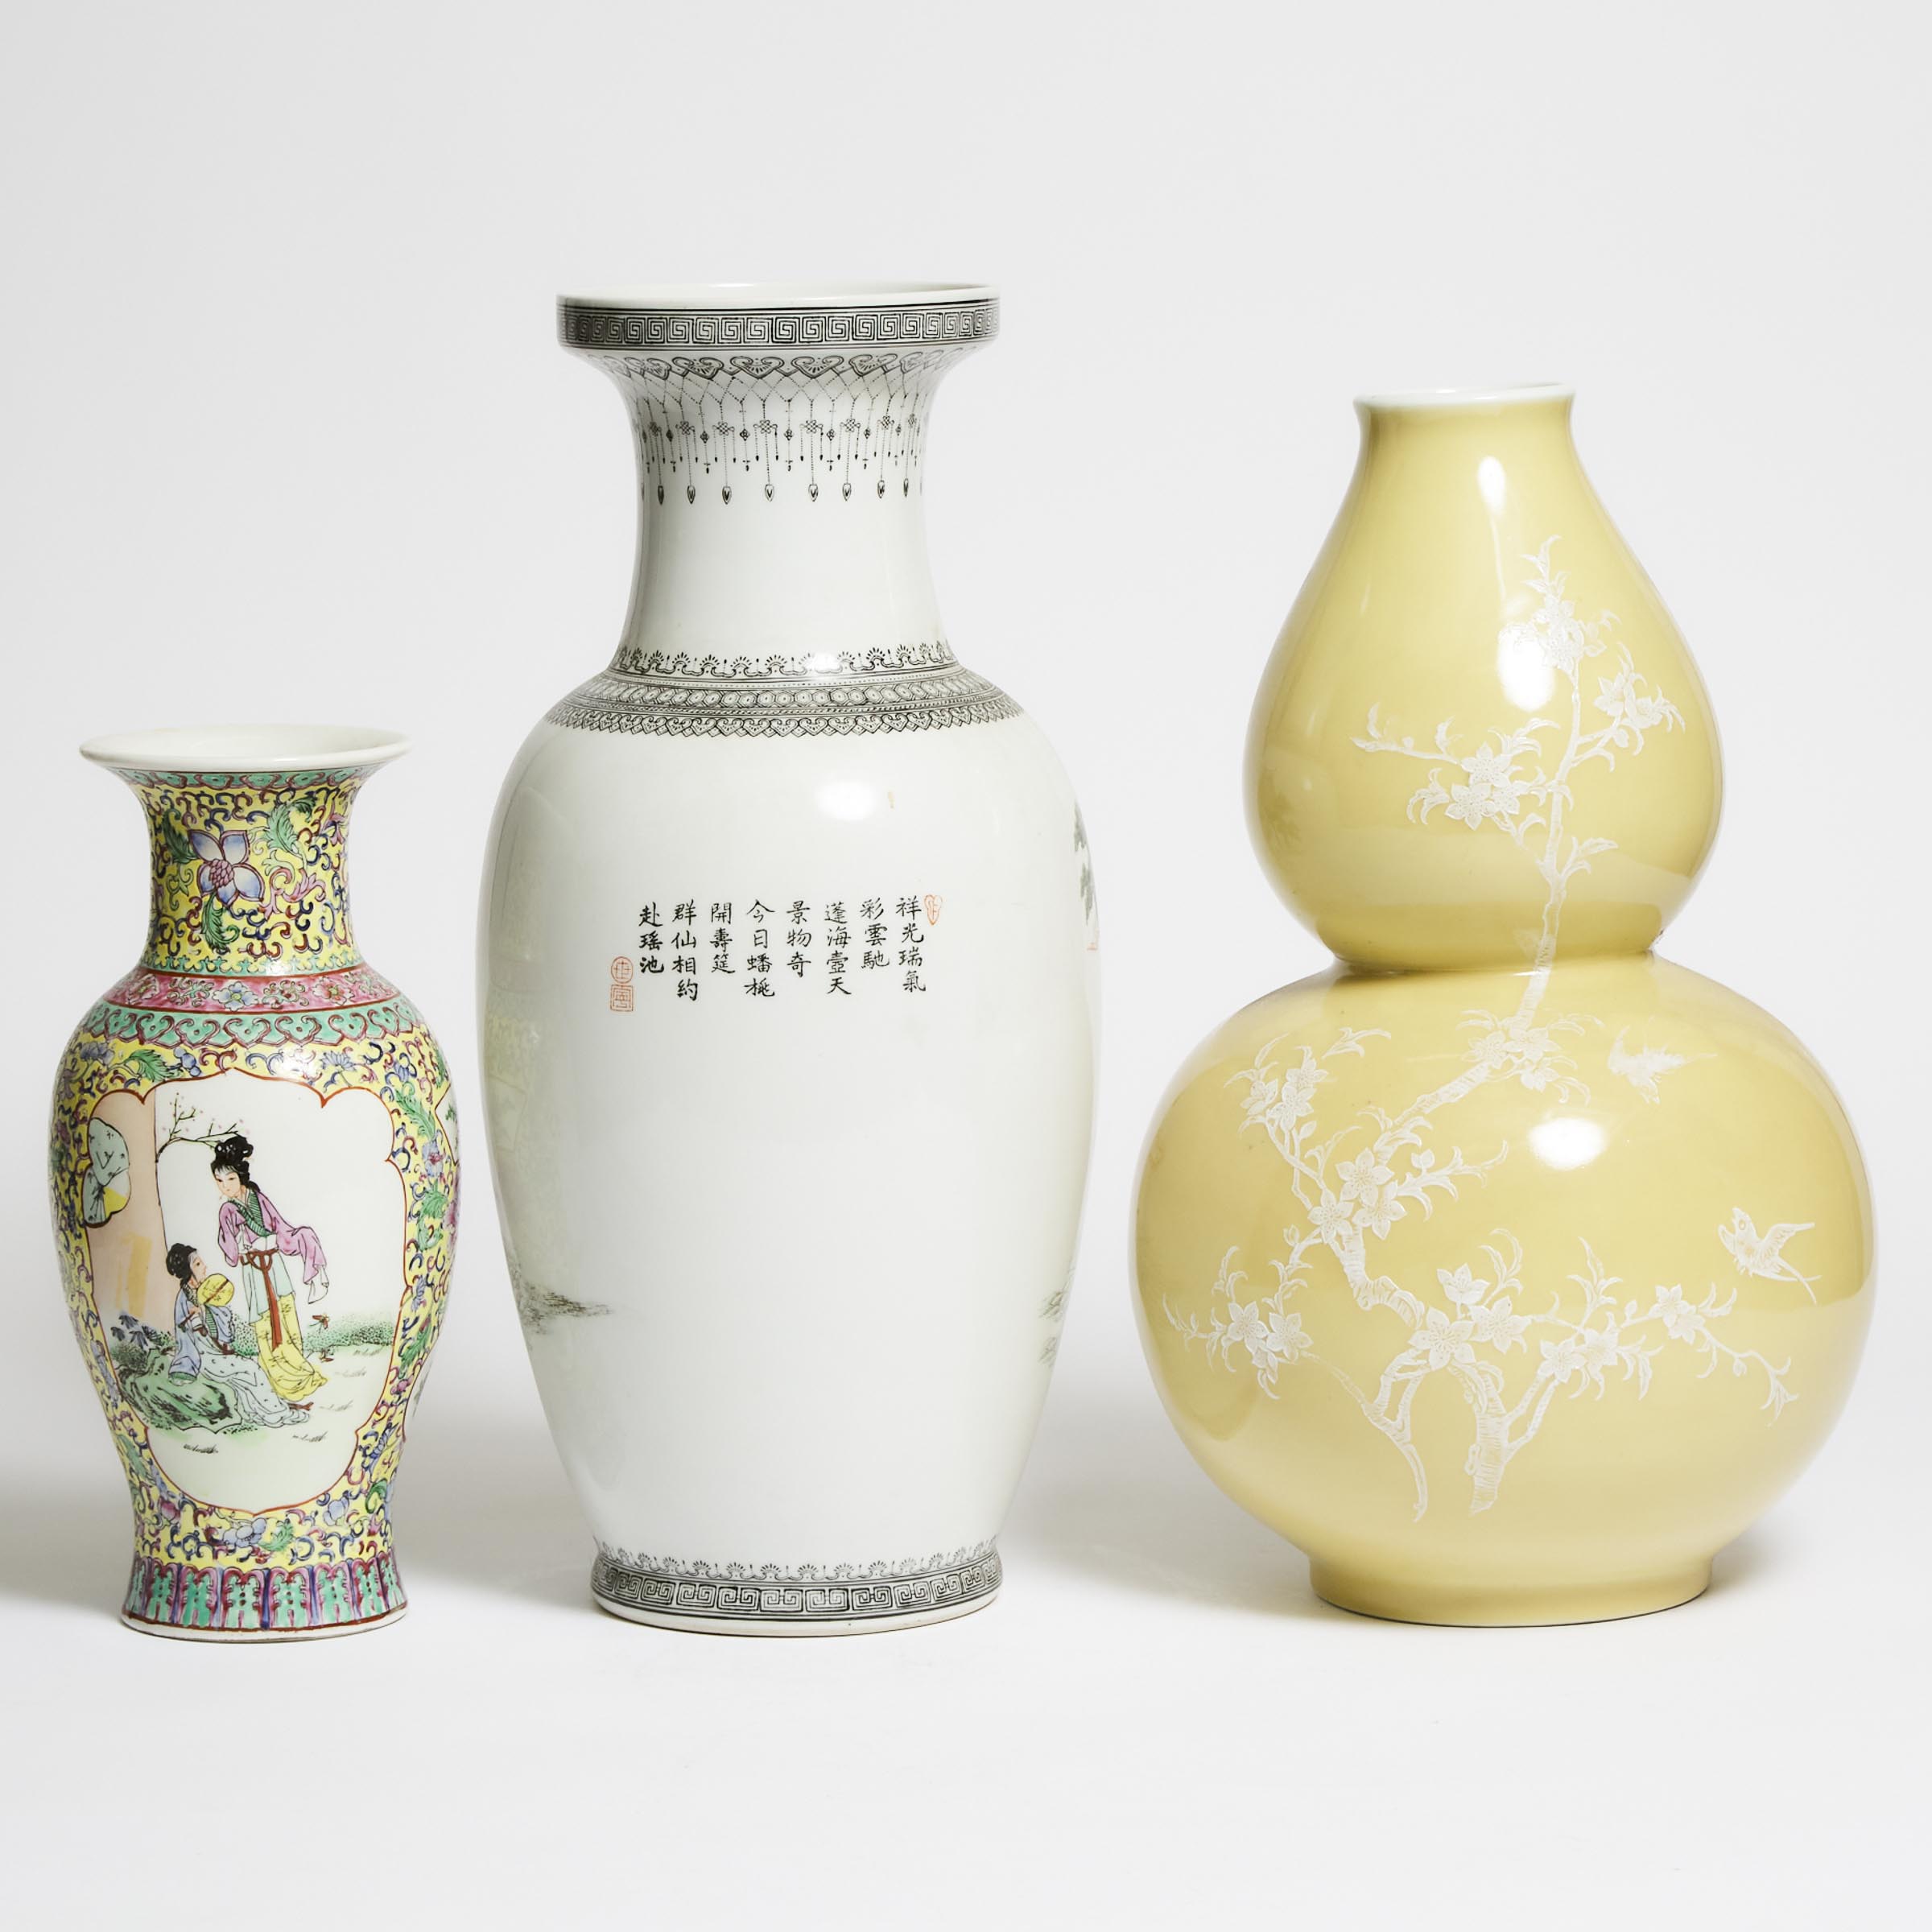 A Group of Three Chinese Porcelain Vases, 20th Century